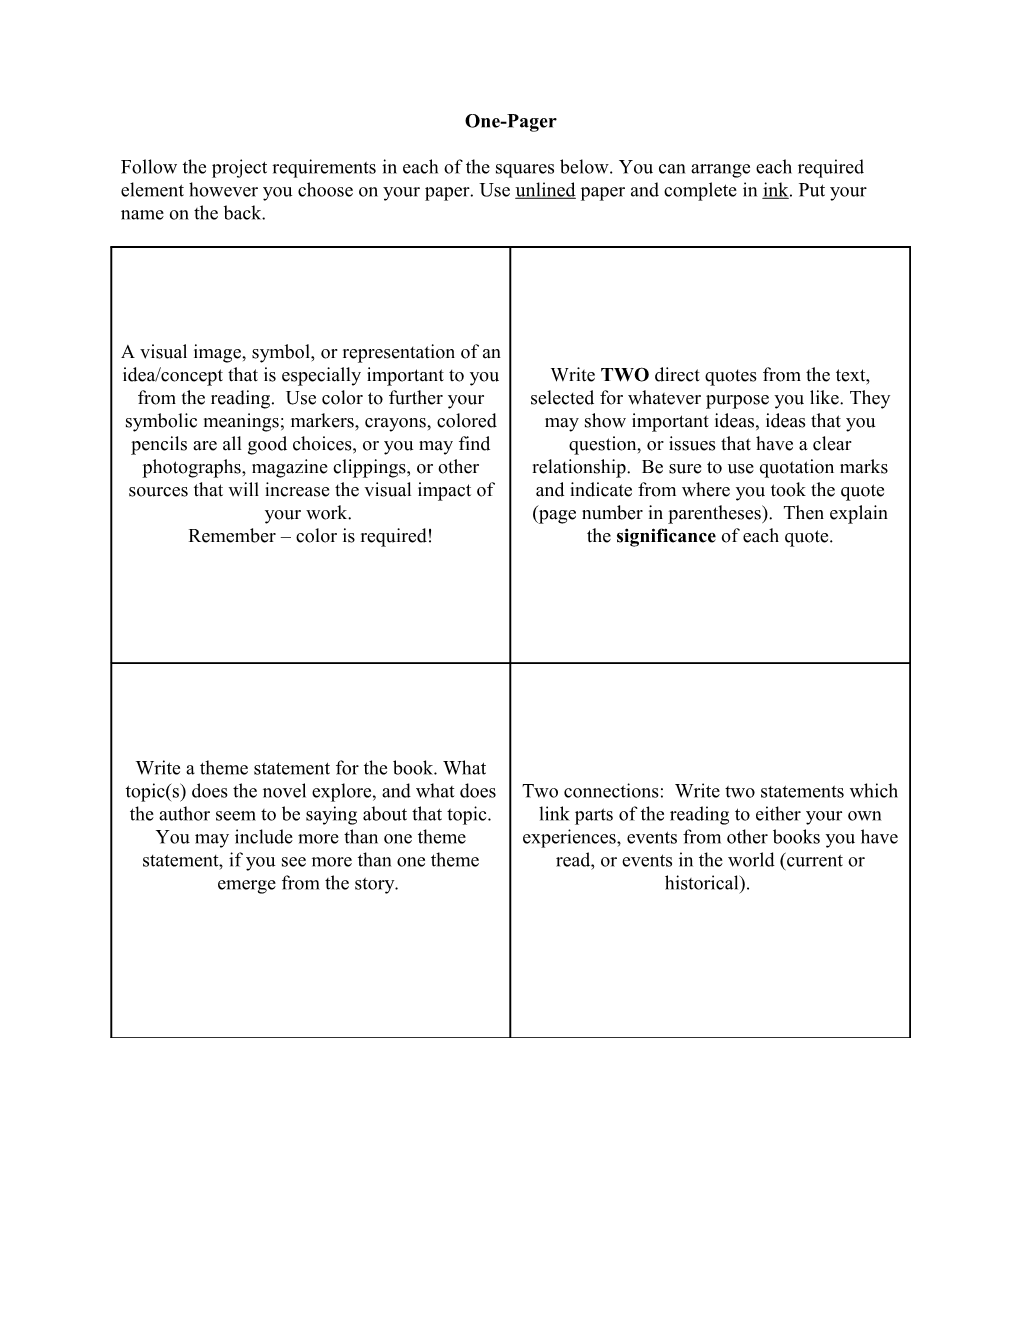 One Pager Grading Rubric